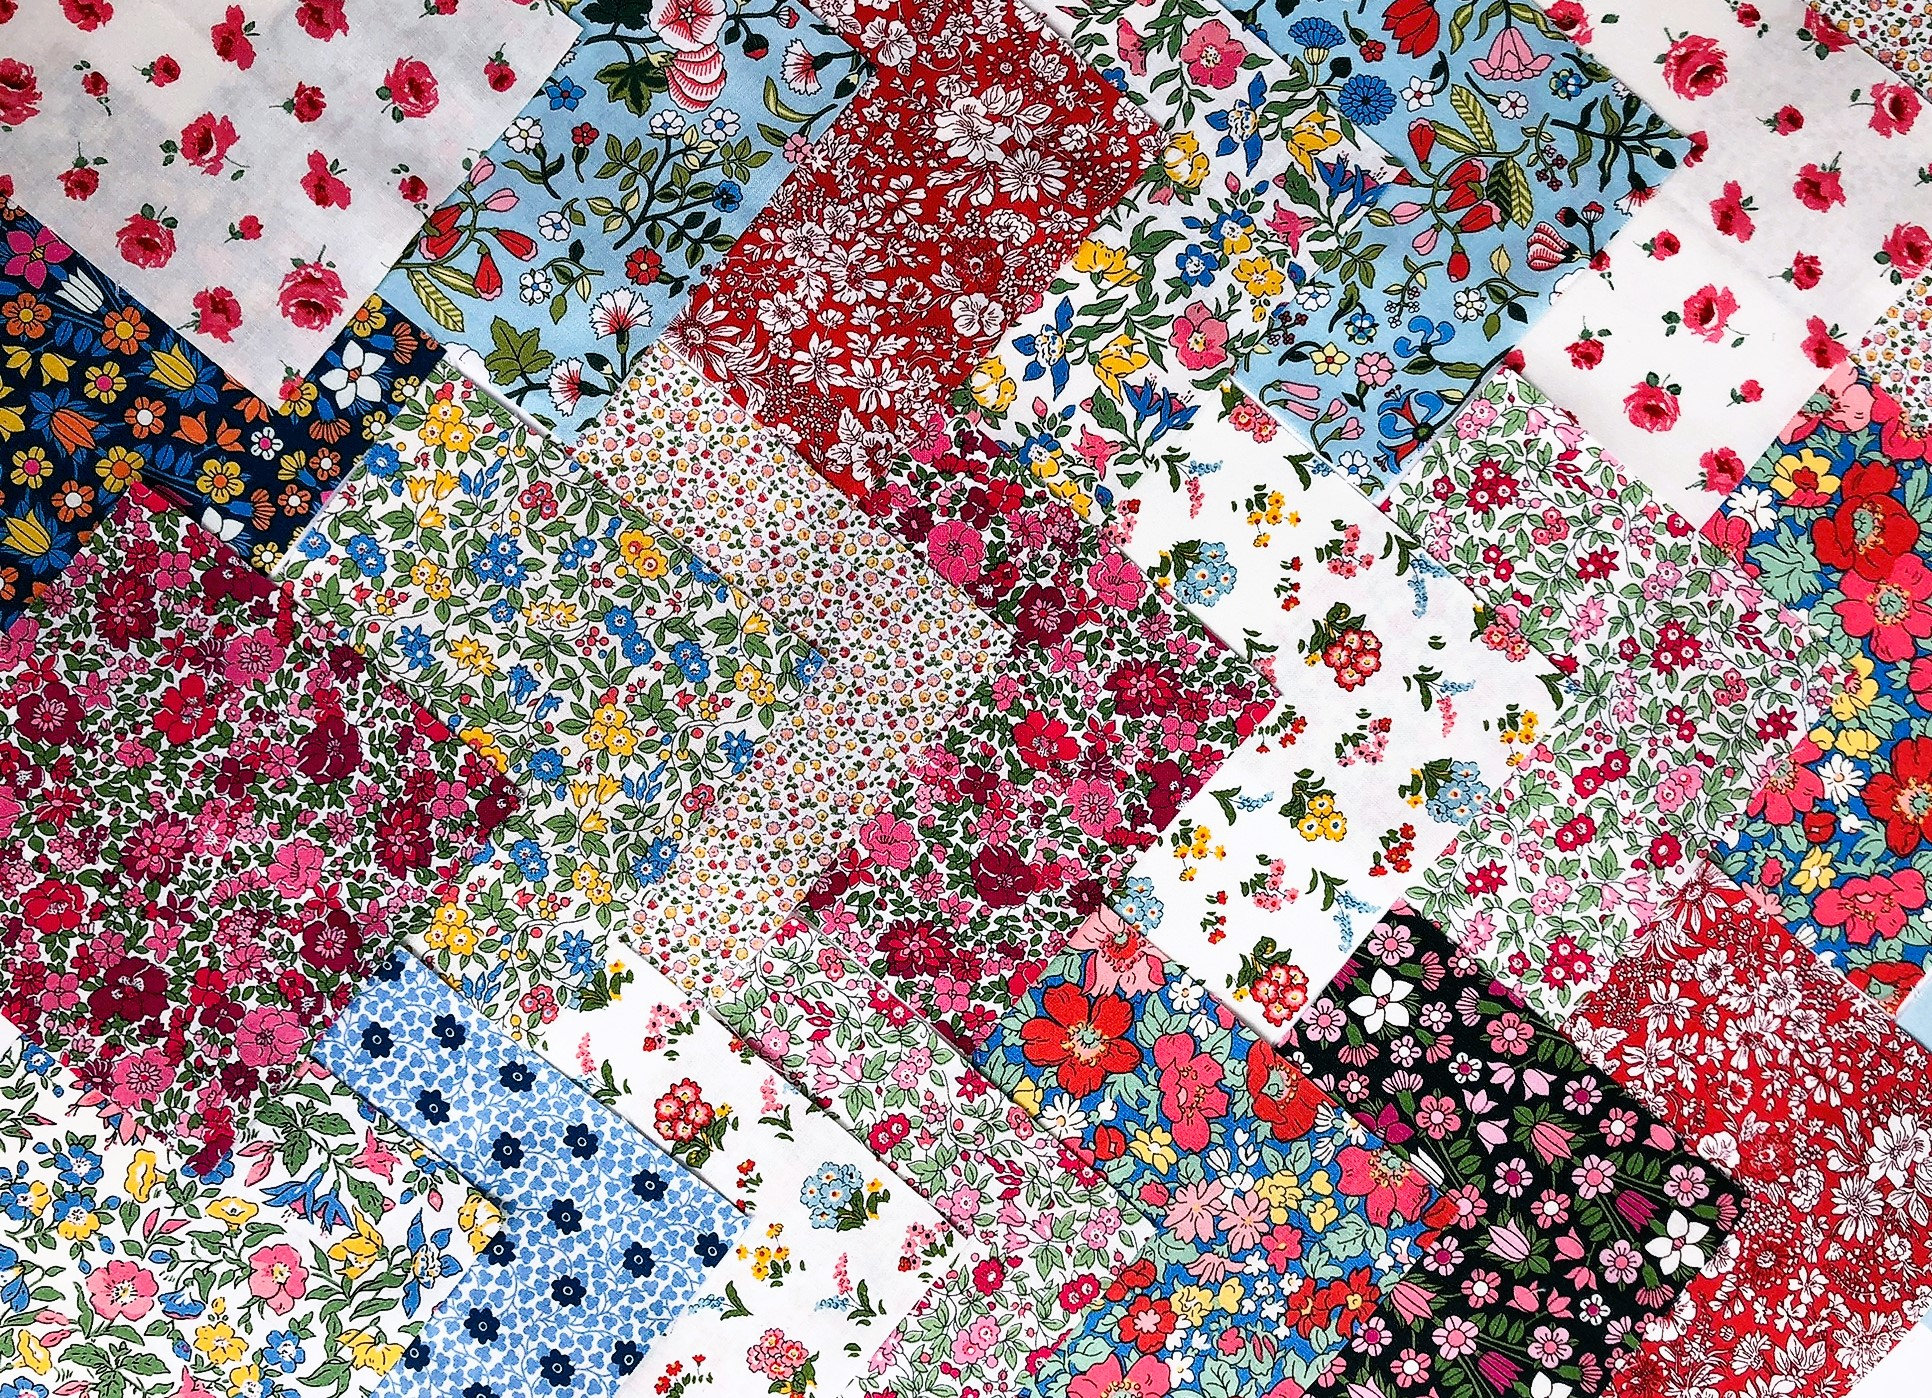 40 Liberty Quilting Squares, Liberty Fabric Square, Patchwork